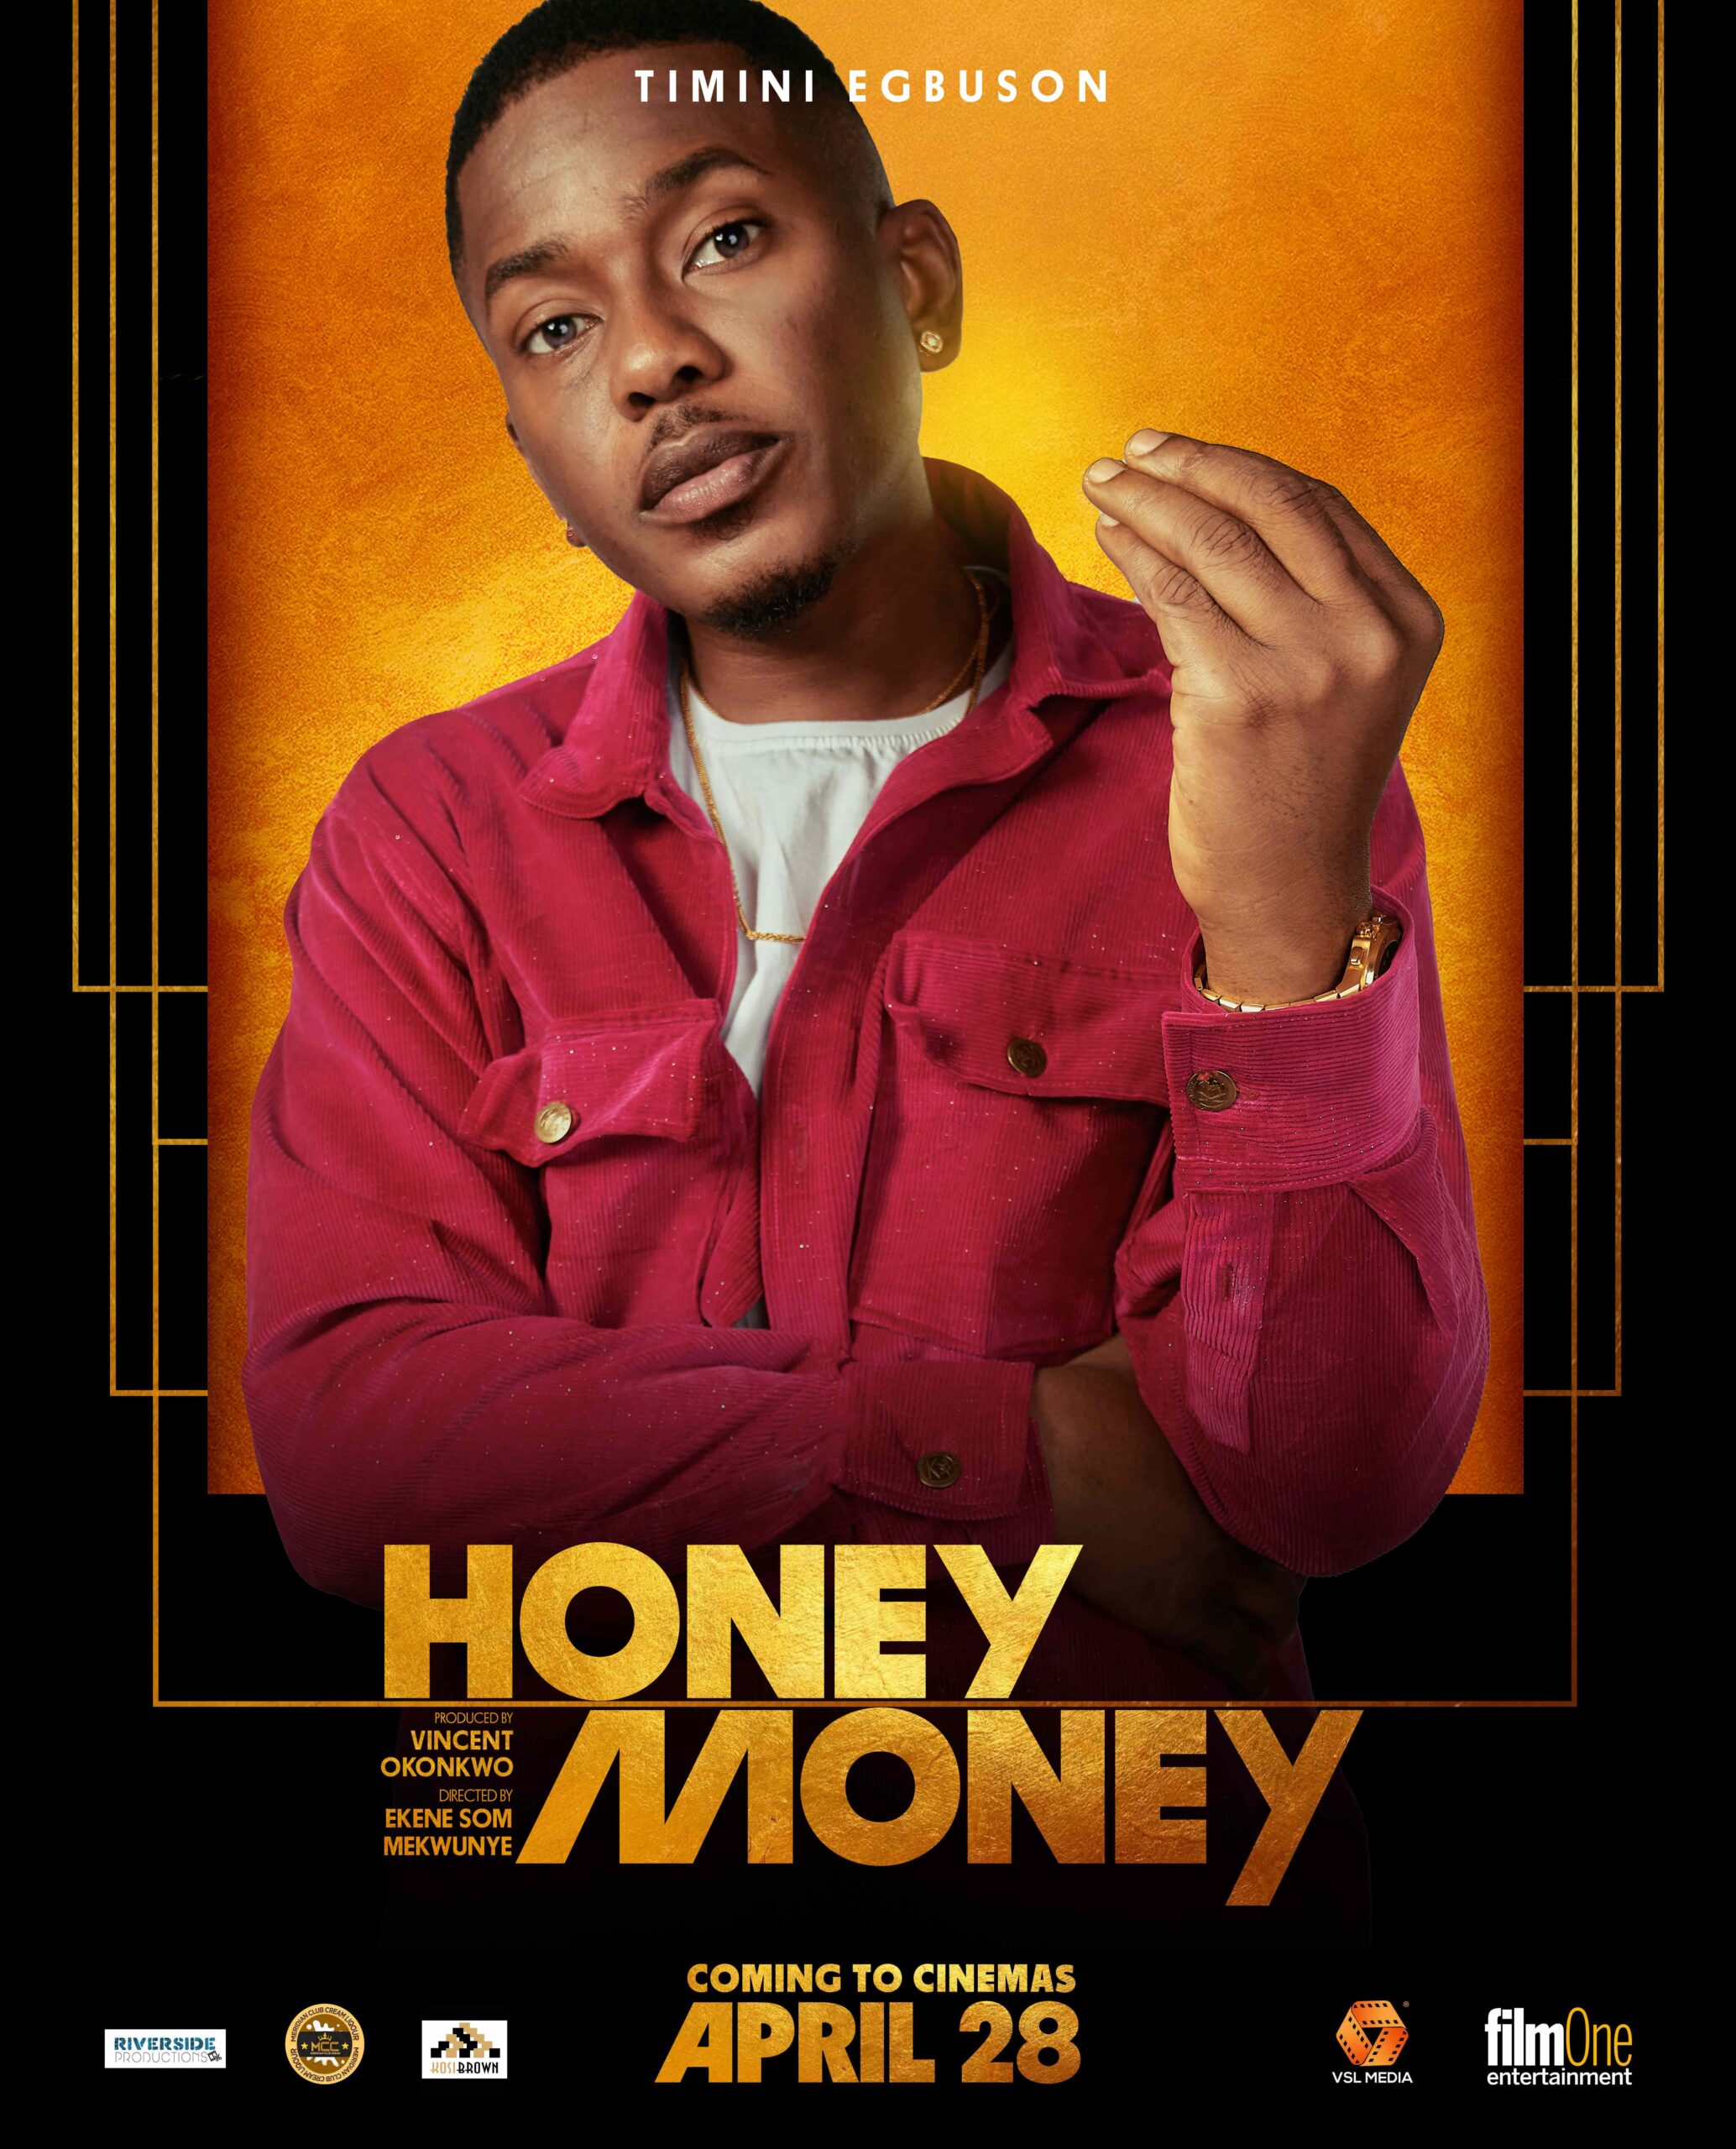 Character poster Timini Blk Victor scaled - New "Honey Money" Posters Reveal Closer Character First Looks